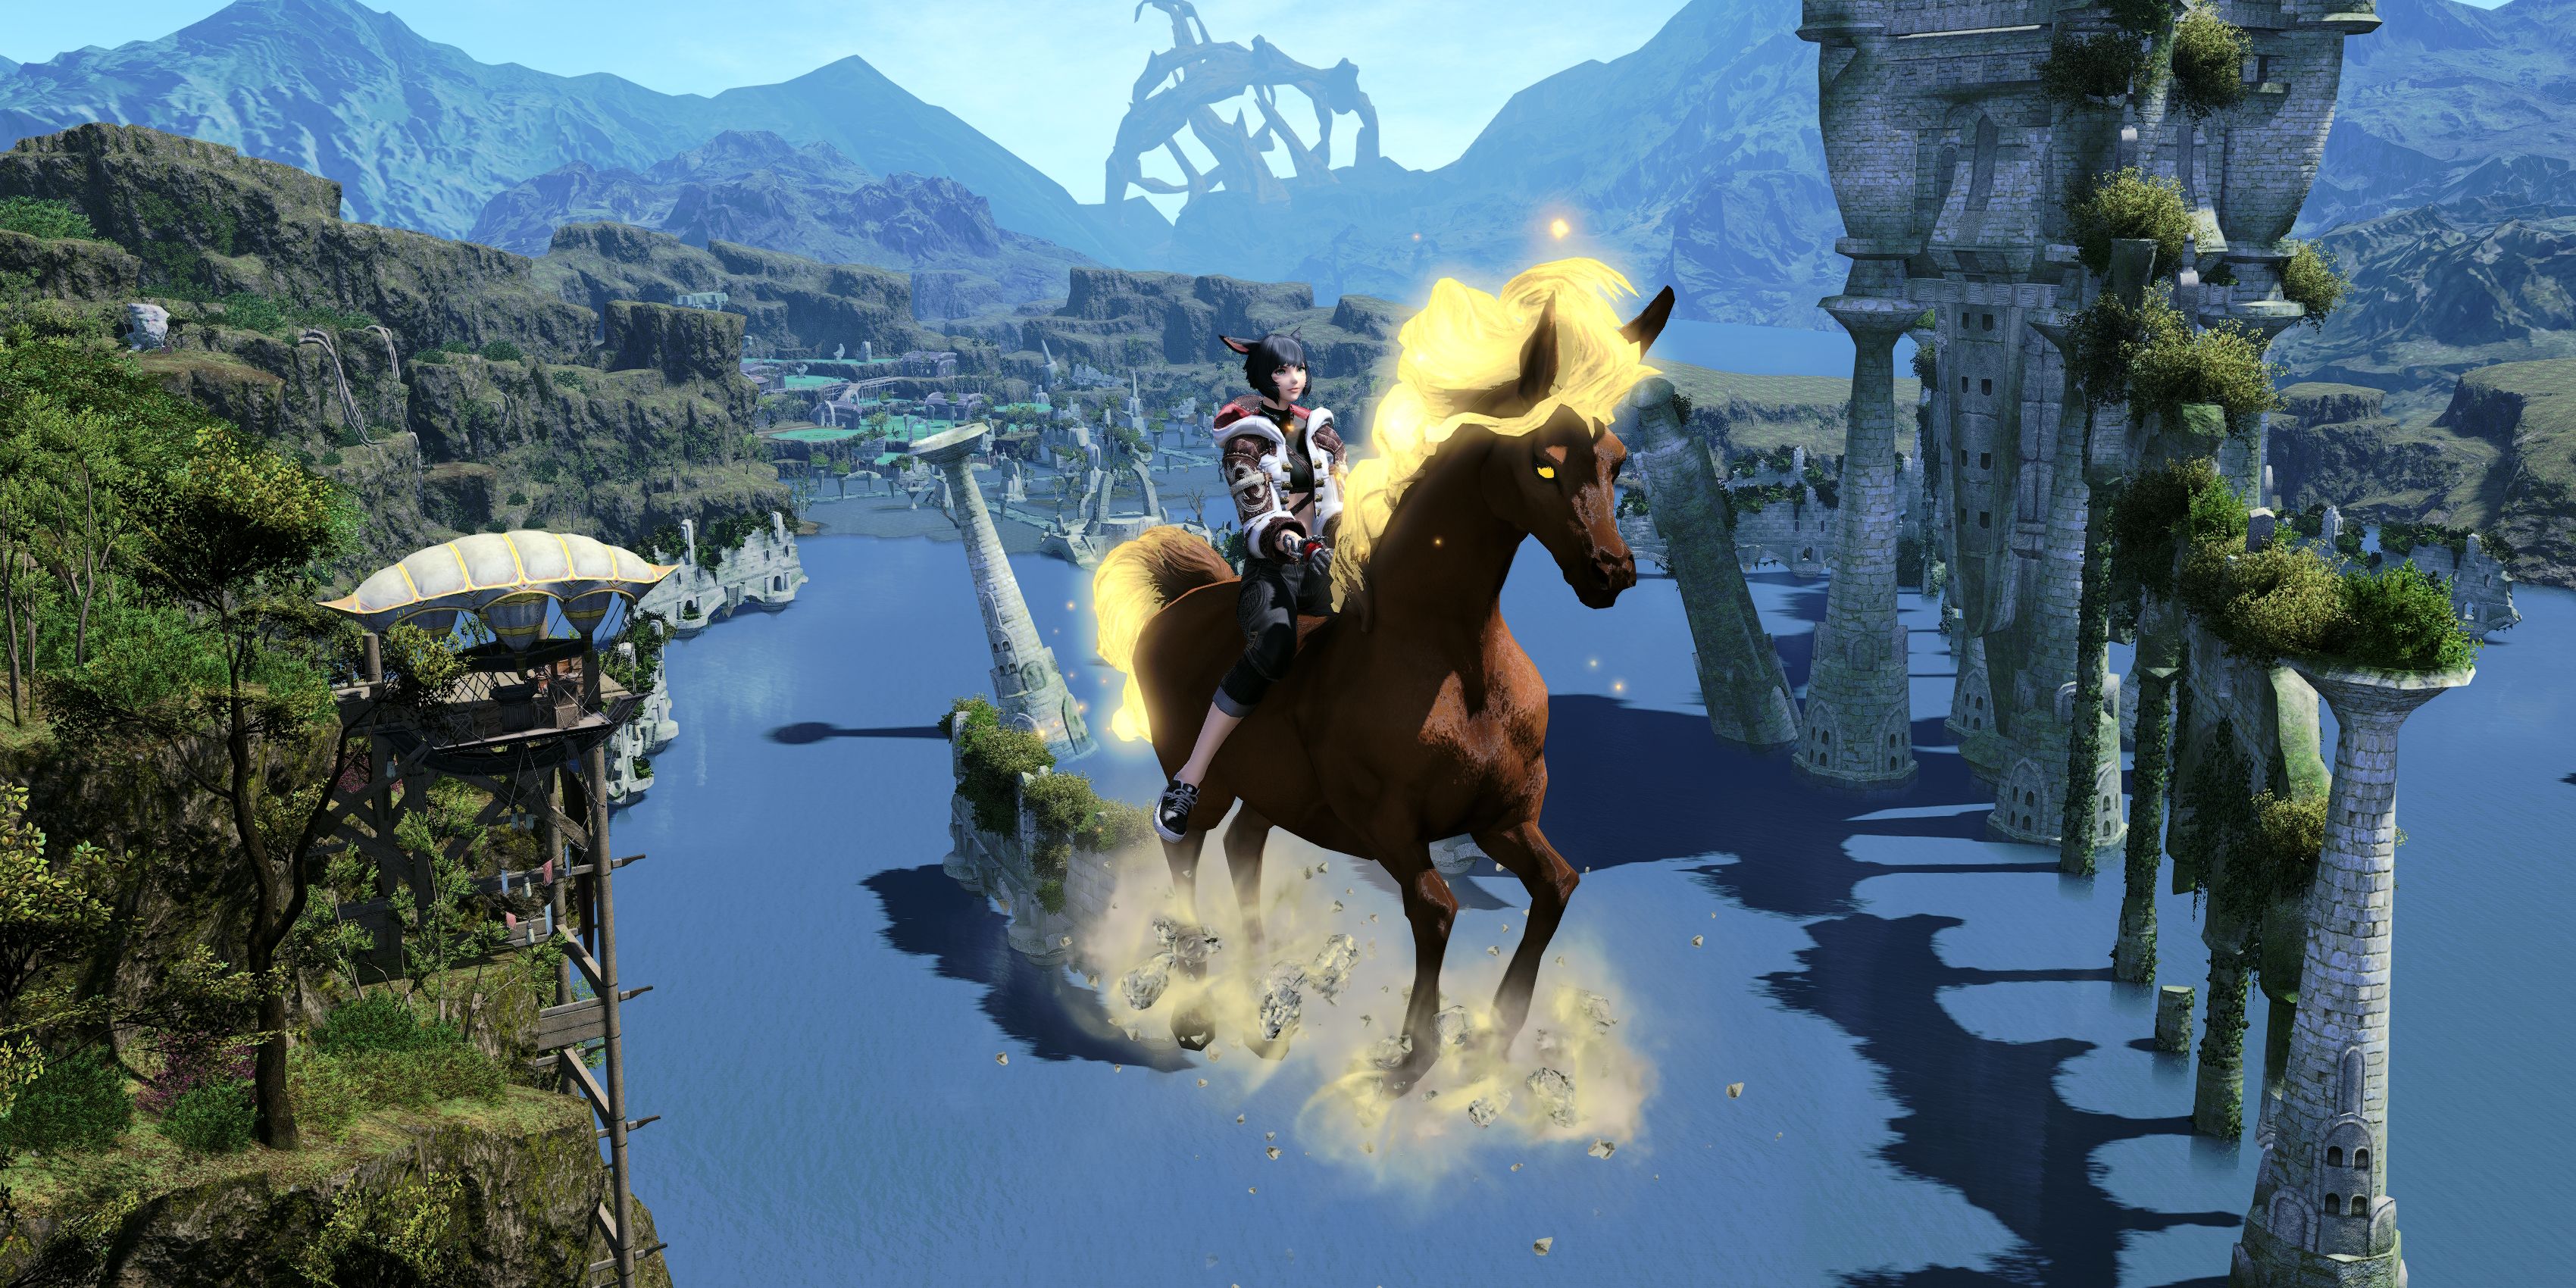 A Final Fantasy 14 screenshot of the Gullfaxi mount, a brown horse with a glowing gold mane and tail, and elemental earth orbiting its hooves.